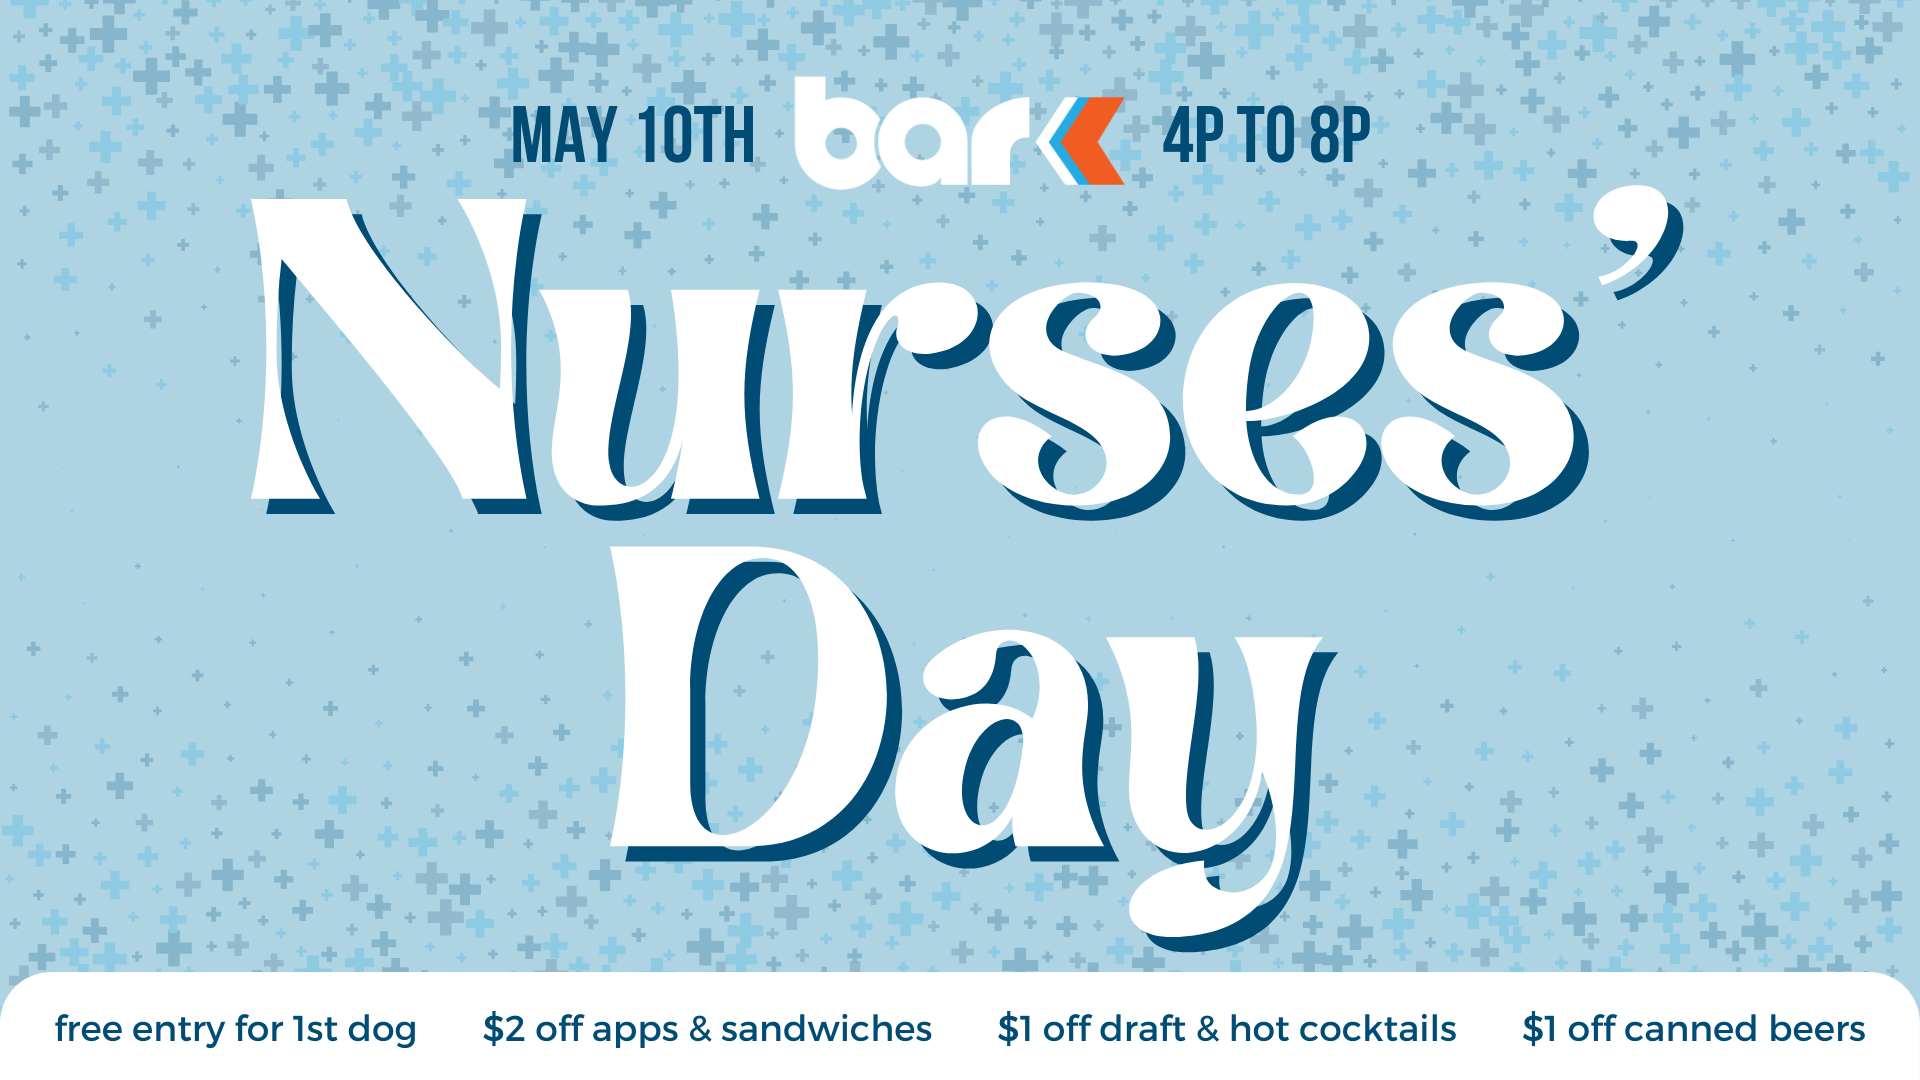 Nurses Day on may 10th from 4pm to 8pm. Bar K. 1st free dog entry, $2 off apps and sandwiches, $1 off Tap and hot cocktails, $1 off can beers.